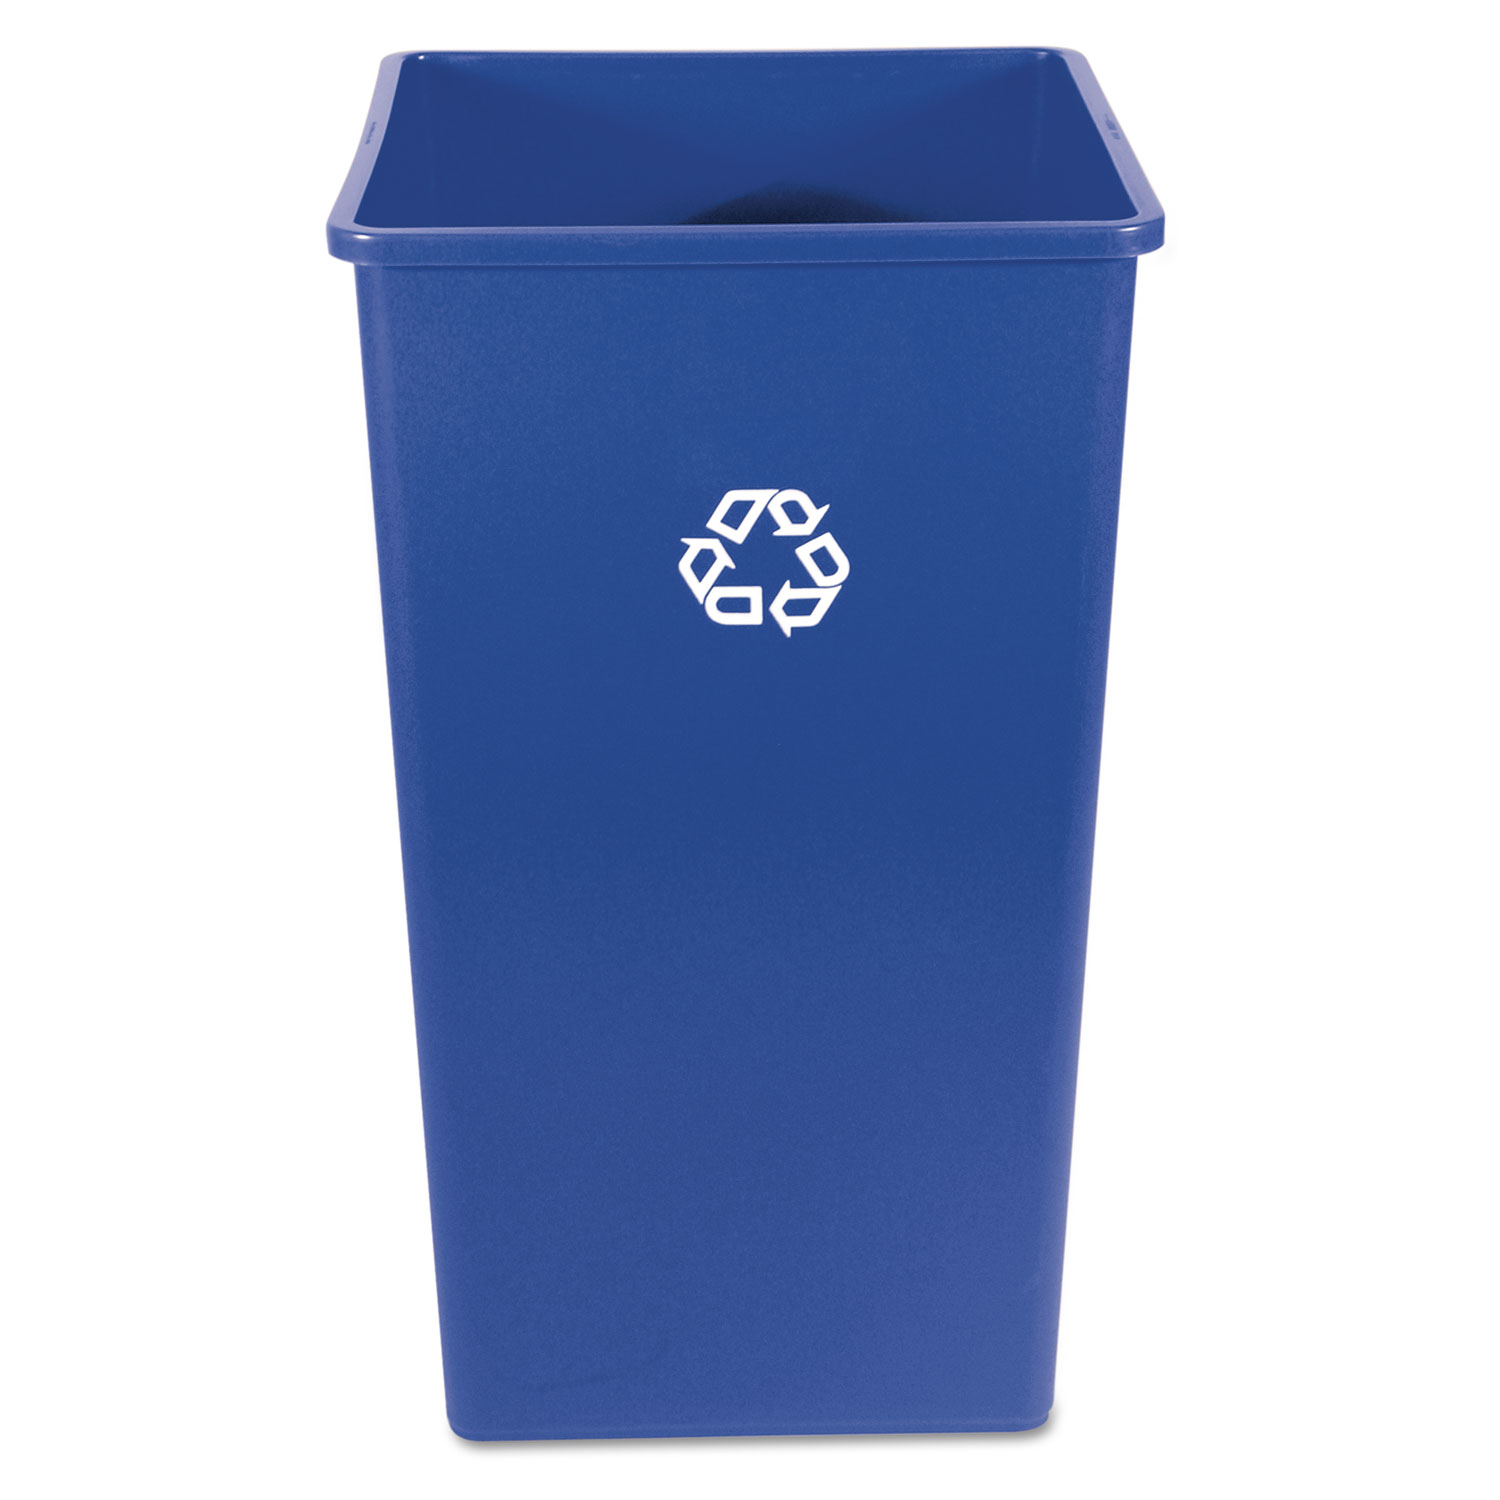  Rubbermaid Commercial FG395973BLUE Recycling Container, Square, Plastic, 50 gal, Blue (RCP395973BLU) 